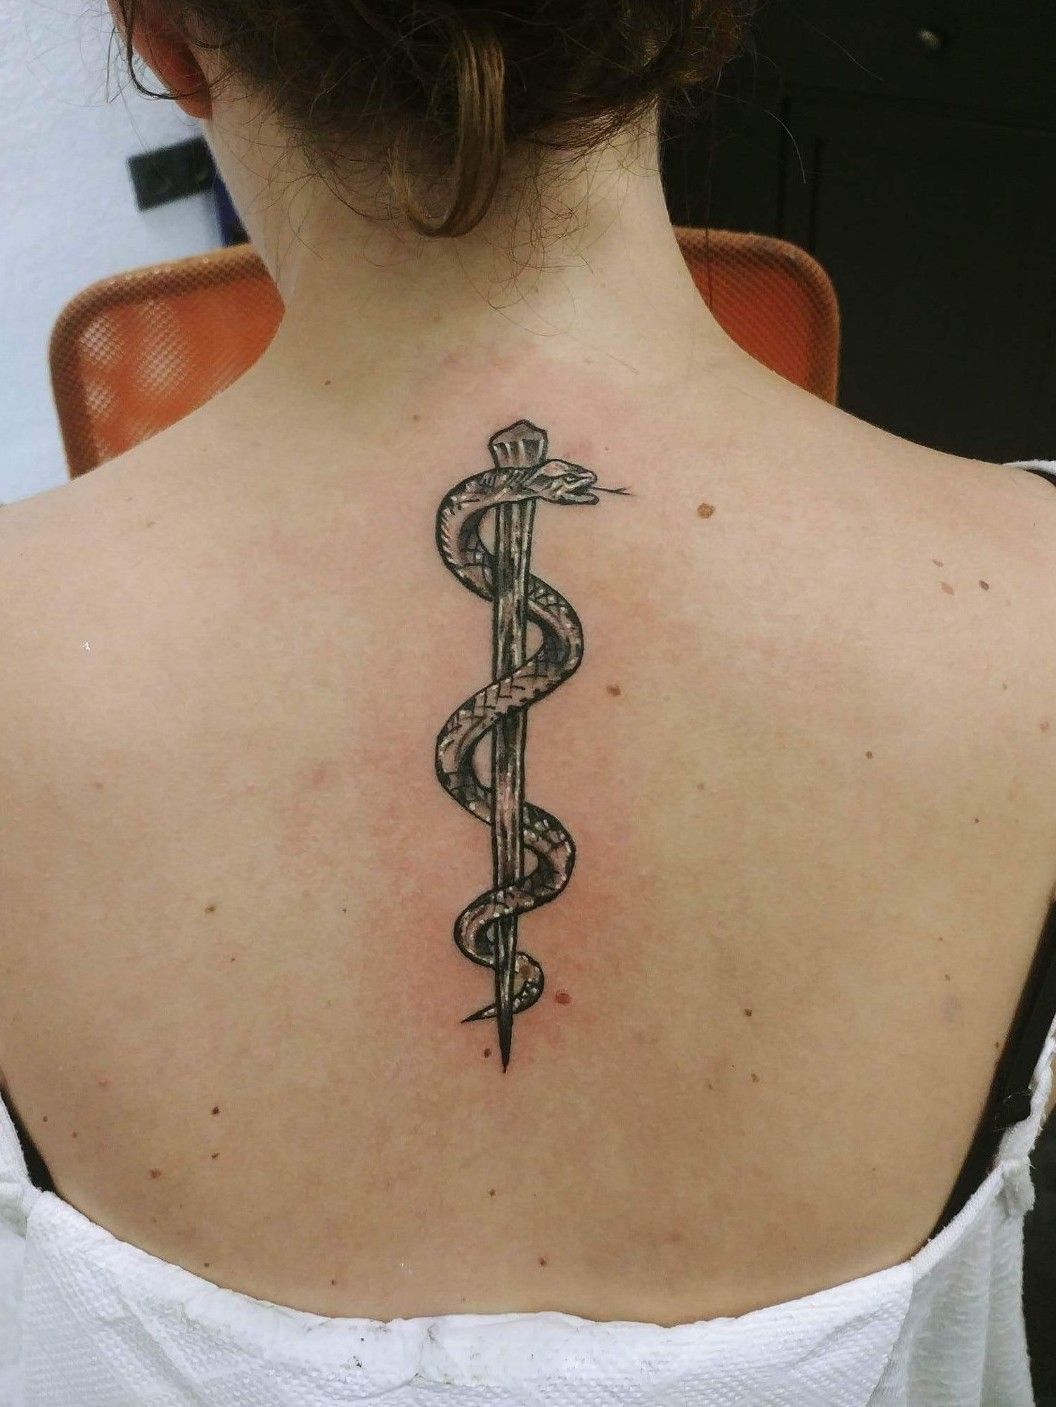 TATTOO is DRAGON on Instagram Rod of asclepius and heart  Tattoos  Cool tattoos Animal tattoo